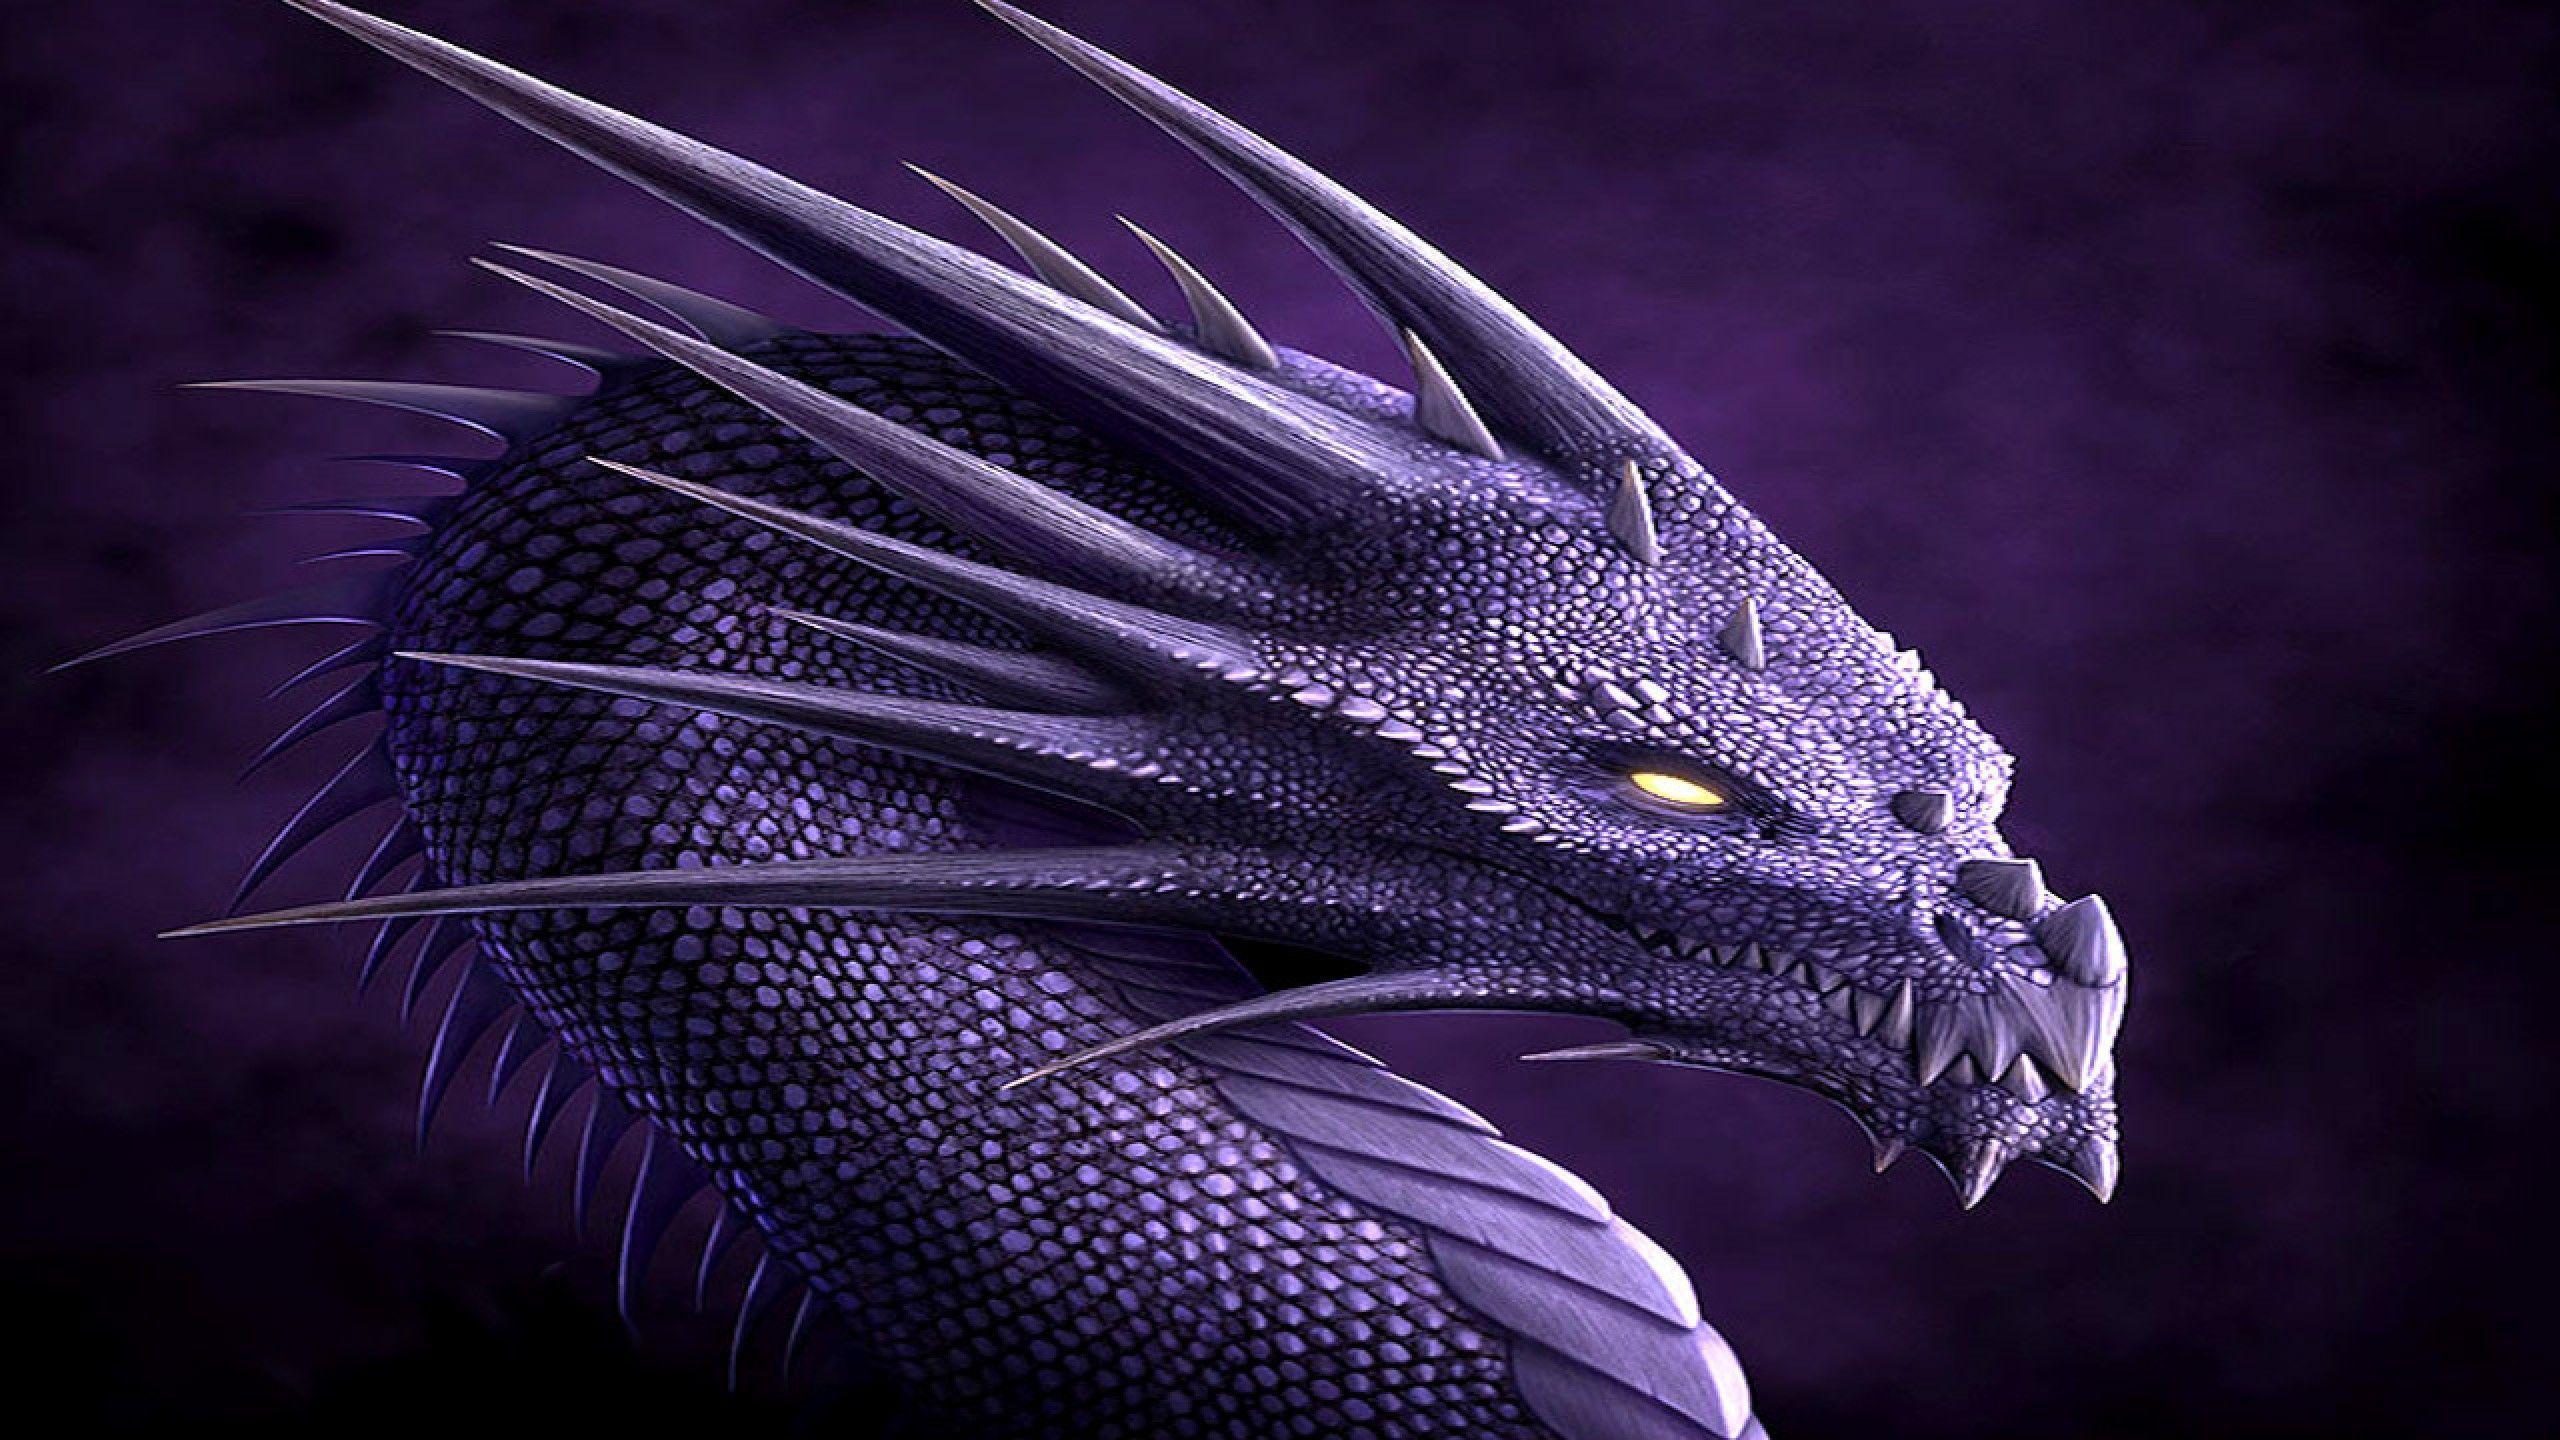 Dragon wallpaper hd What is Dragon wallpapers HD? red dragon aesthetic ...